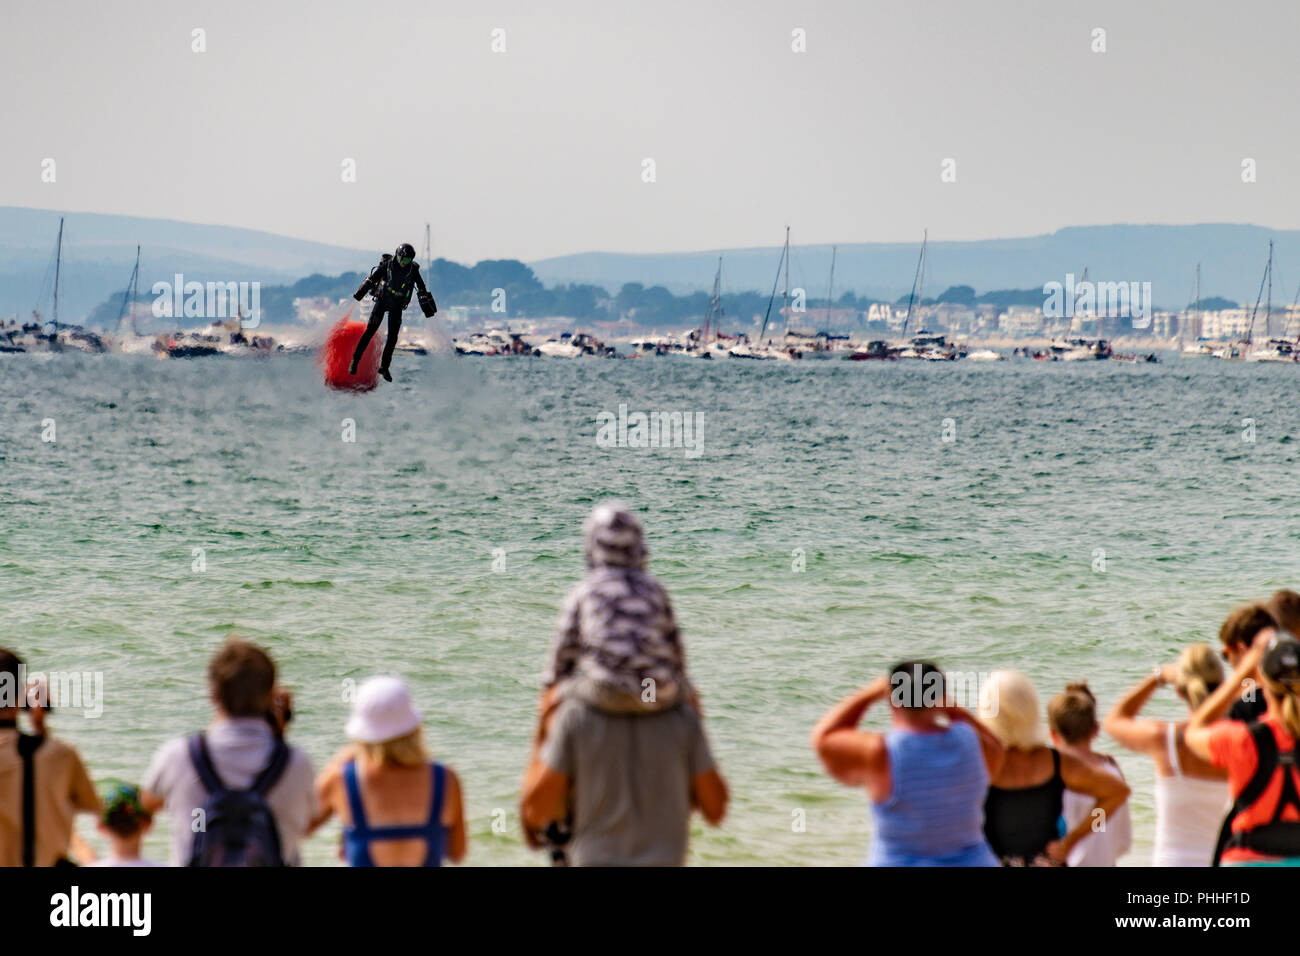 Bournemouth, UK. 1st September 2018. Richard Browning, the founder of Gravity Industries, has a malfunction at Bournemouth Air Festival and ends up crashing into the sea in his jet suit. He is uninjured and walks away with a very wet piece of kit. Part of the annual Air Festival in Bournemouth, Dorset. Credit: Thomas Faull/Alamy Live News Stock Photo